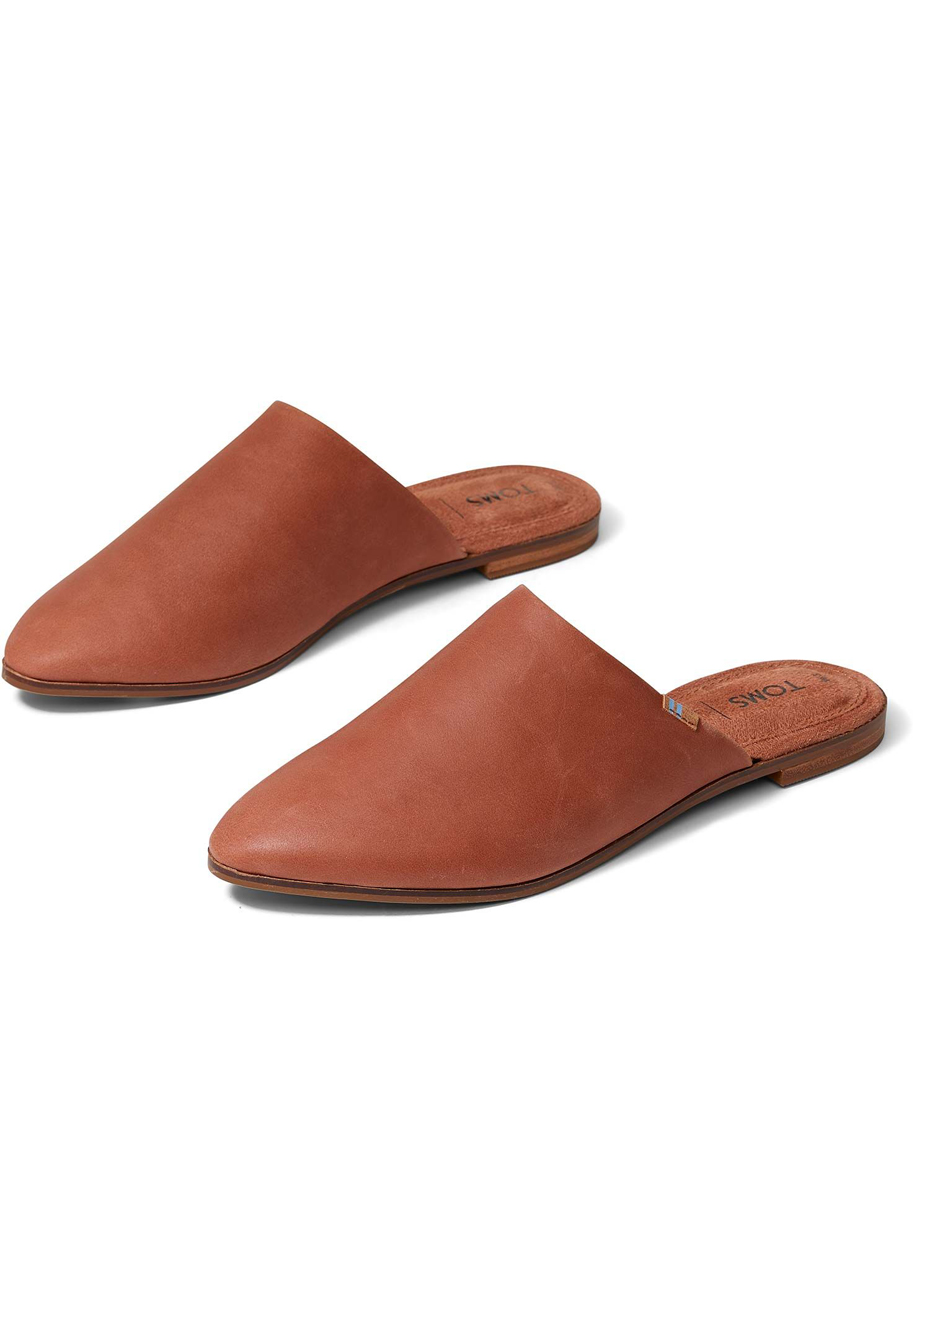 toms leather shoes womens